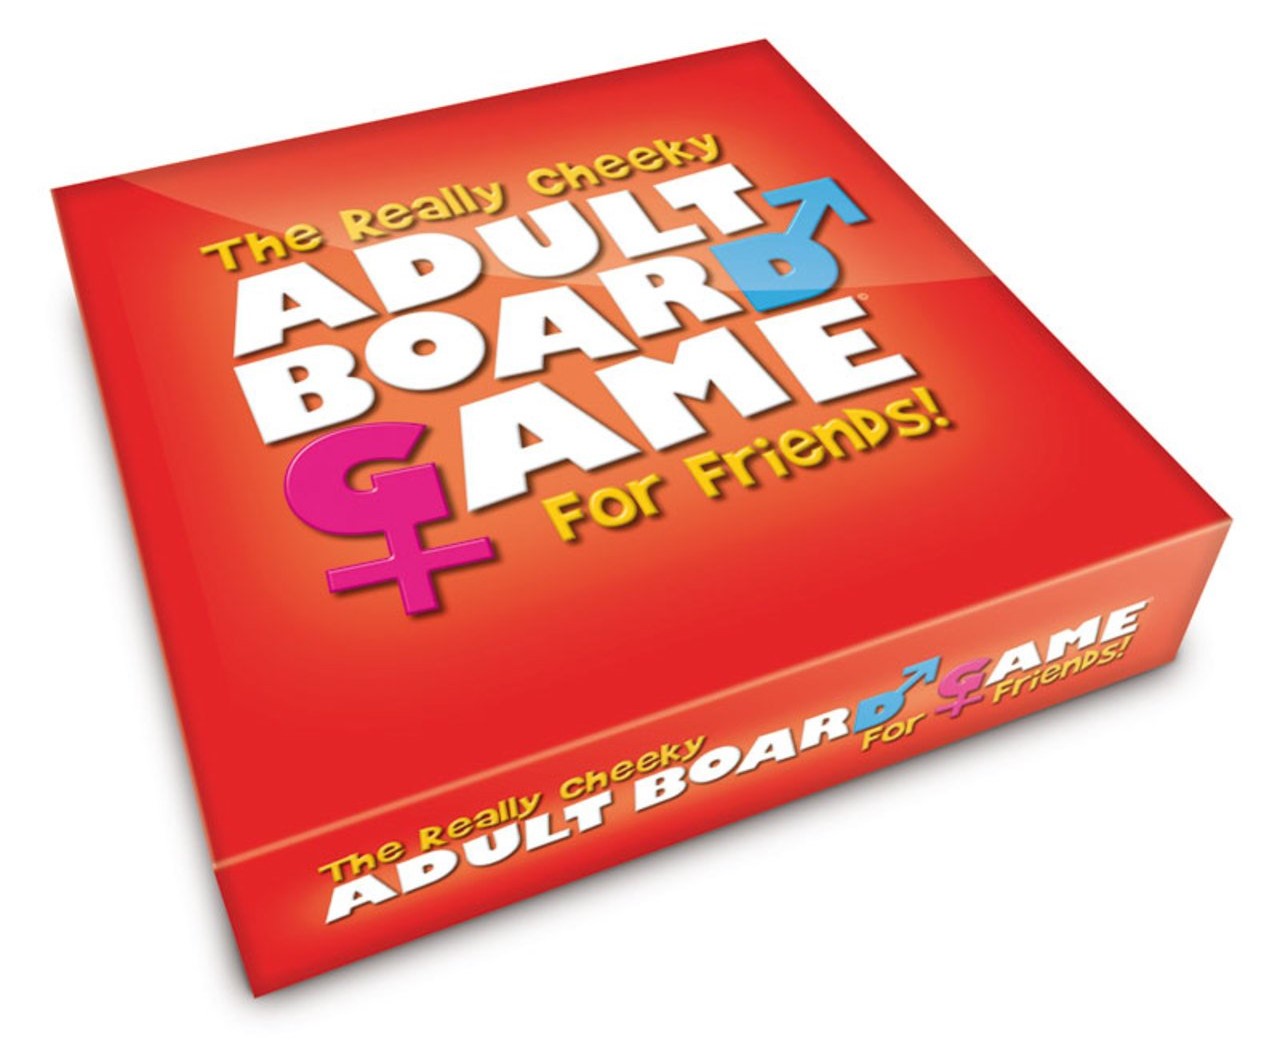 15 Board Games for Adults photo